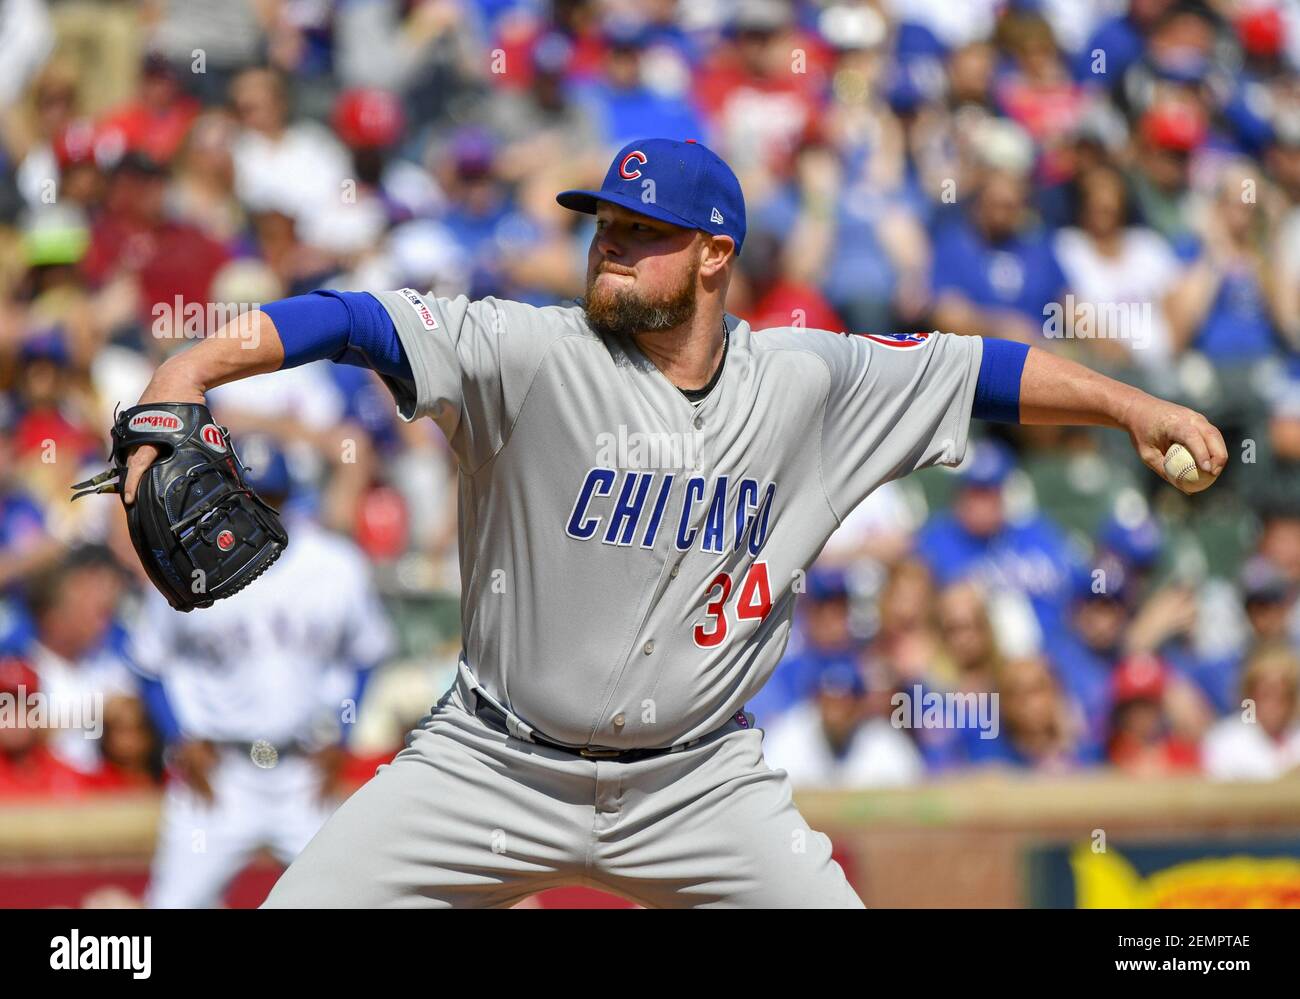 Mar 28, 2019: Chicago Cubs starting pitcher Jon Lester #34 during an  Opening Day MLB game between the Chicago Cubs and the Texas Rangers at  Globe Life Park in Arlington, TX Chicago